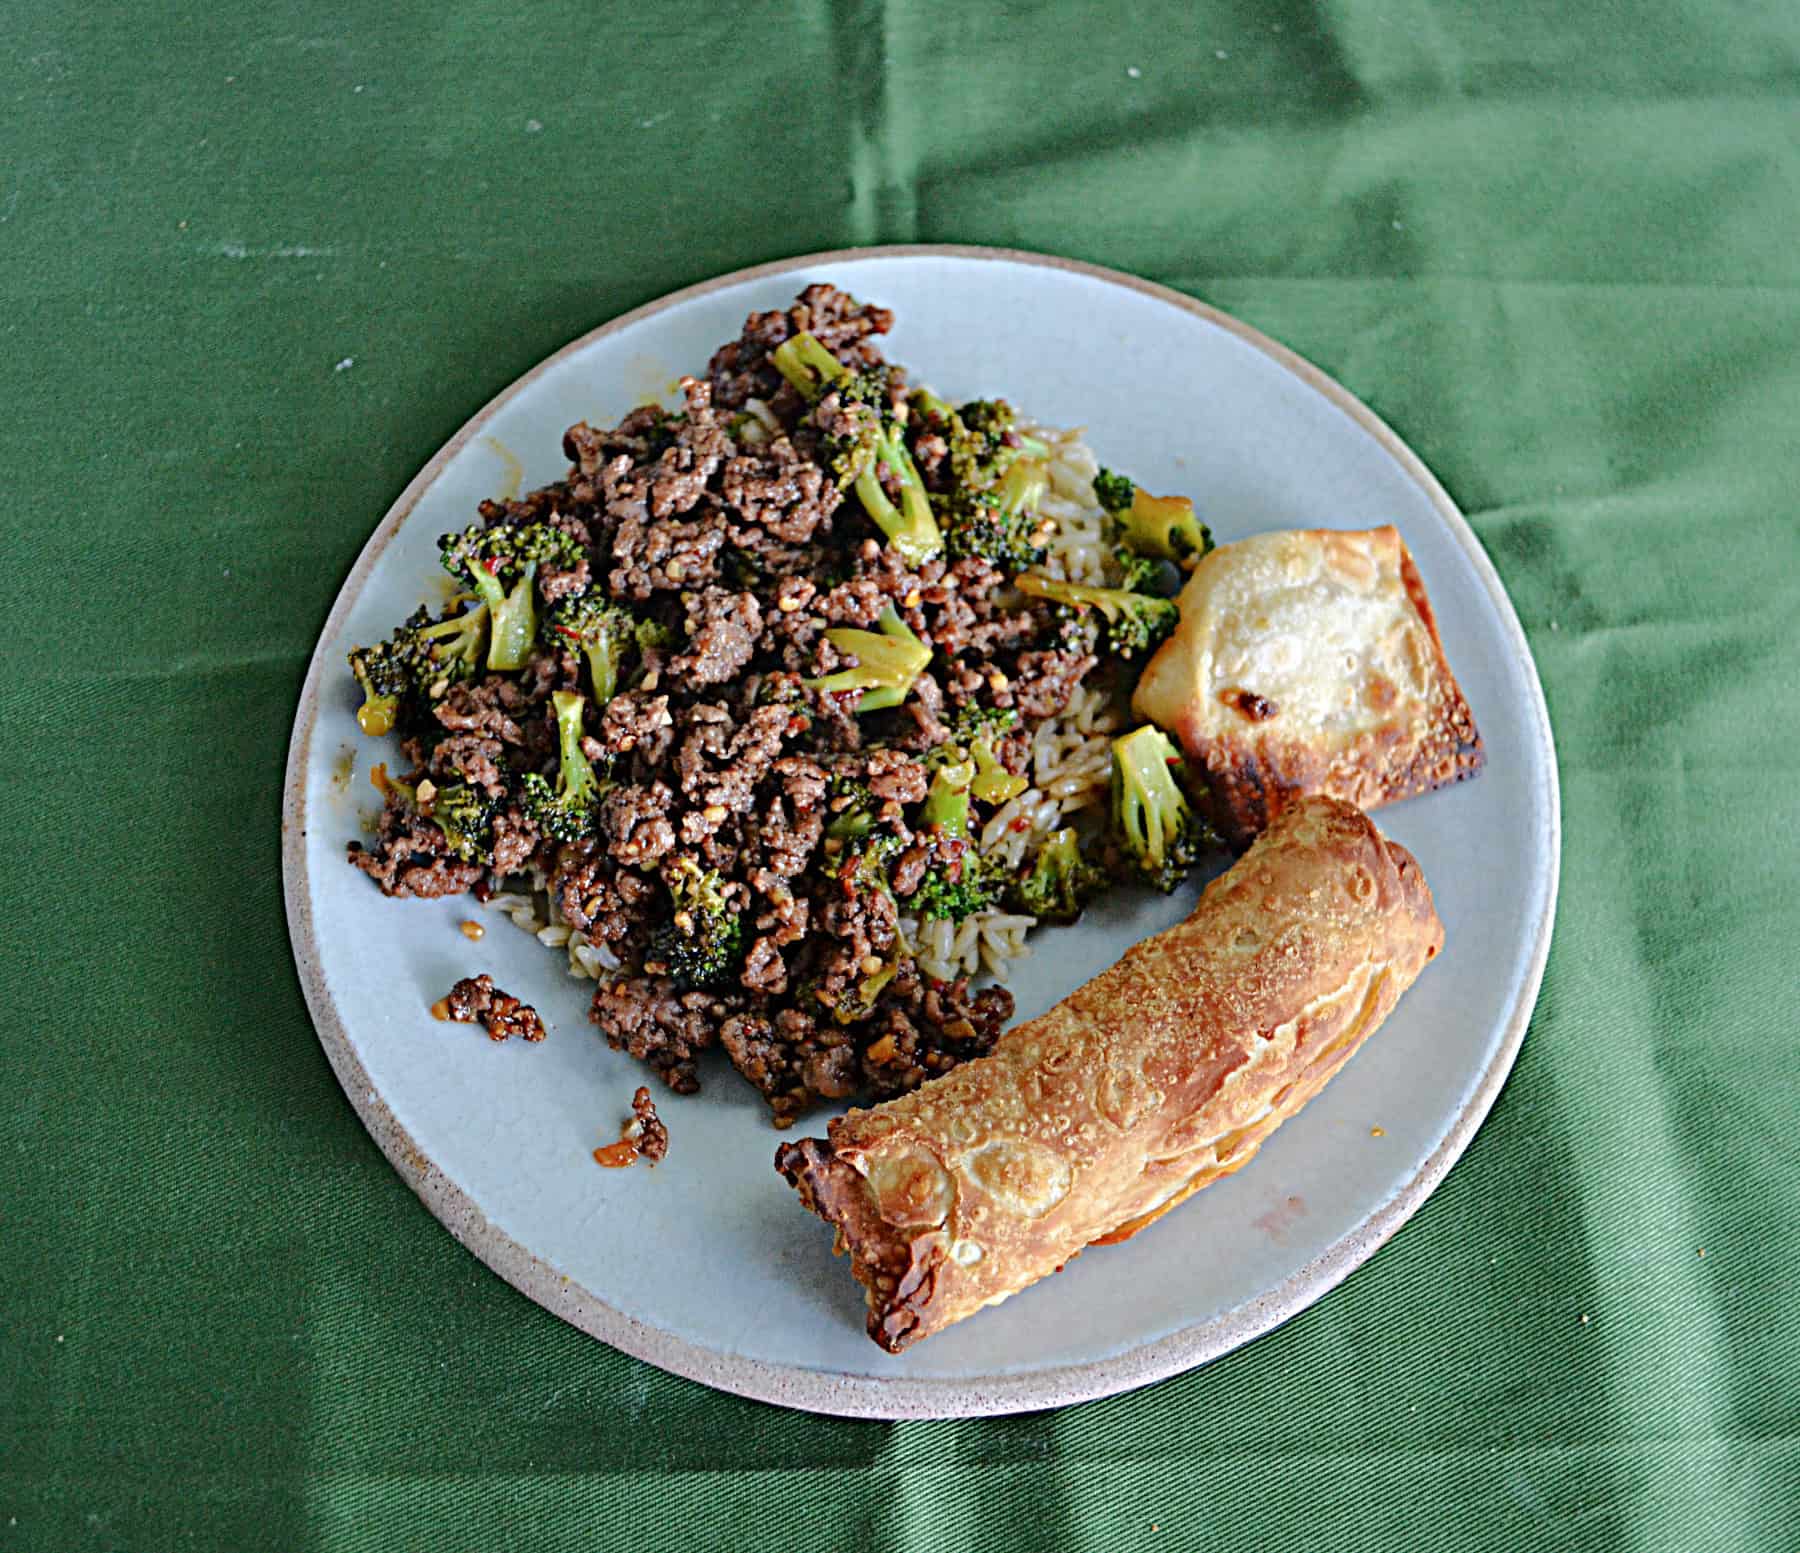 A plate of Korean Beef and Broccoli with an egg roll.